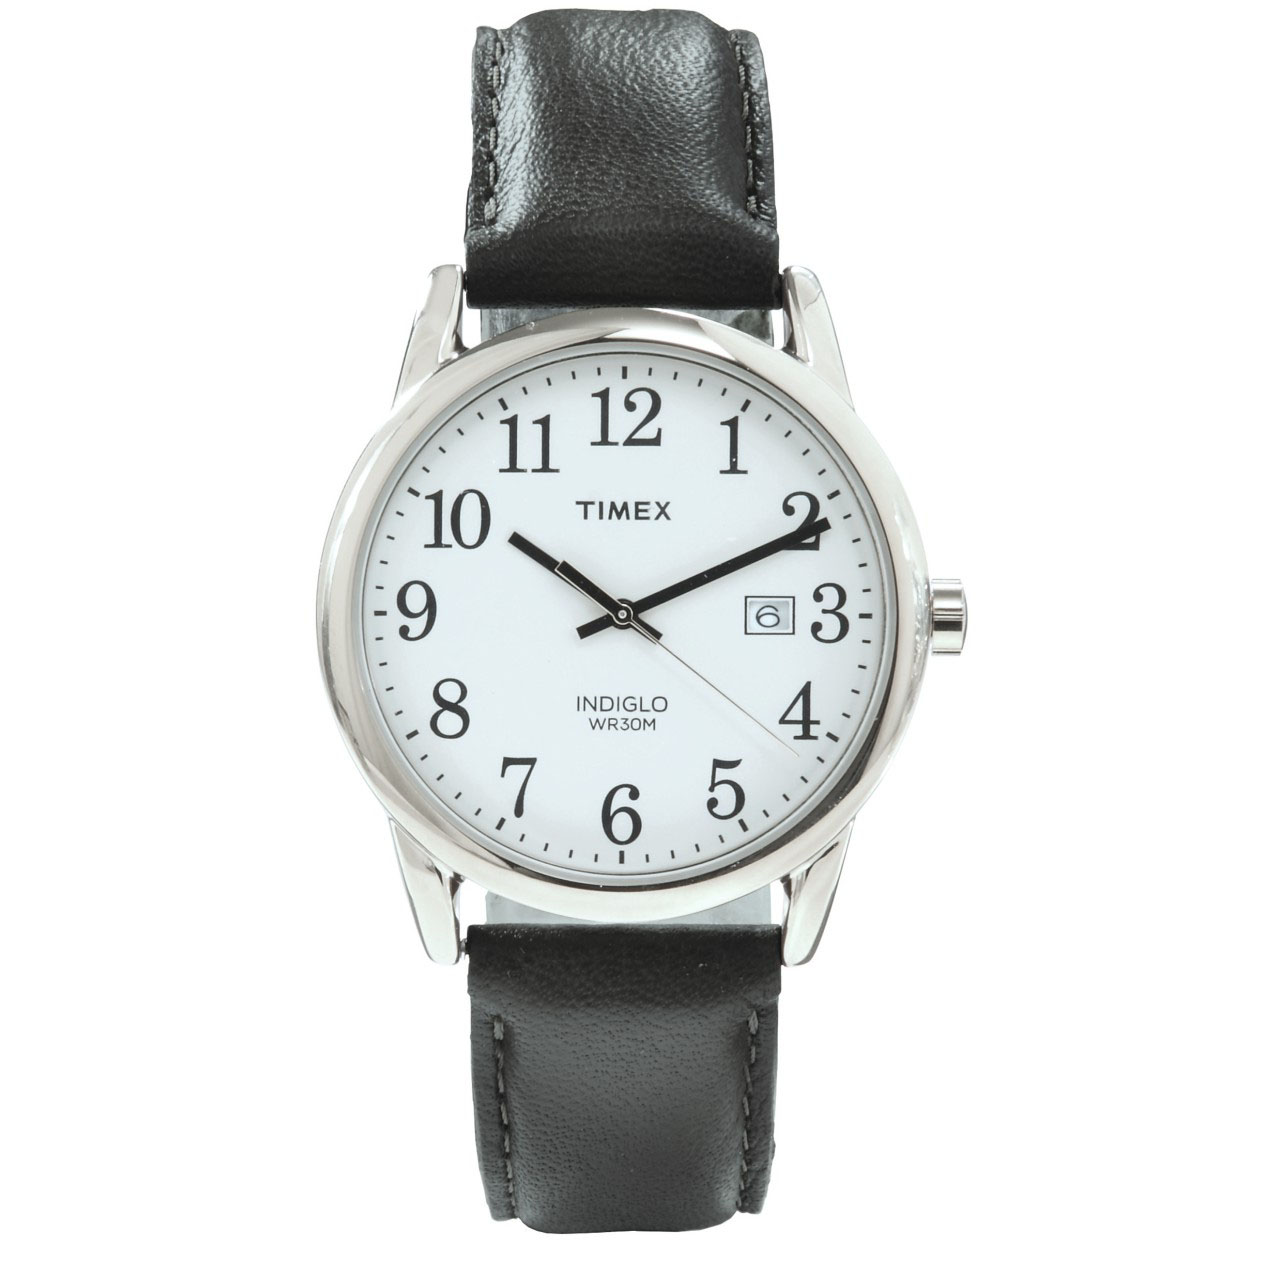 QuickDate Timex Watch with Leather Strap